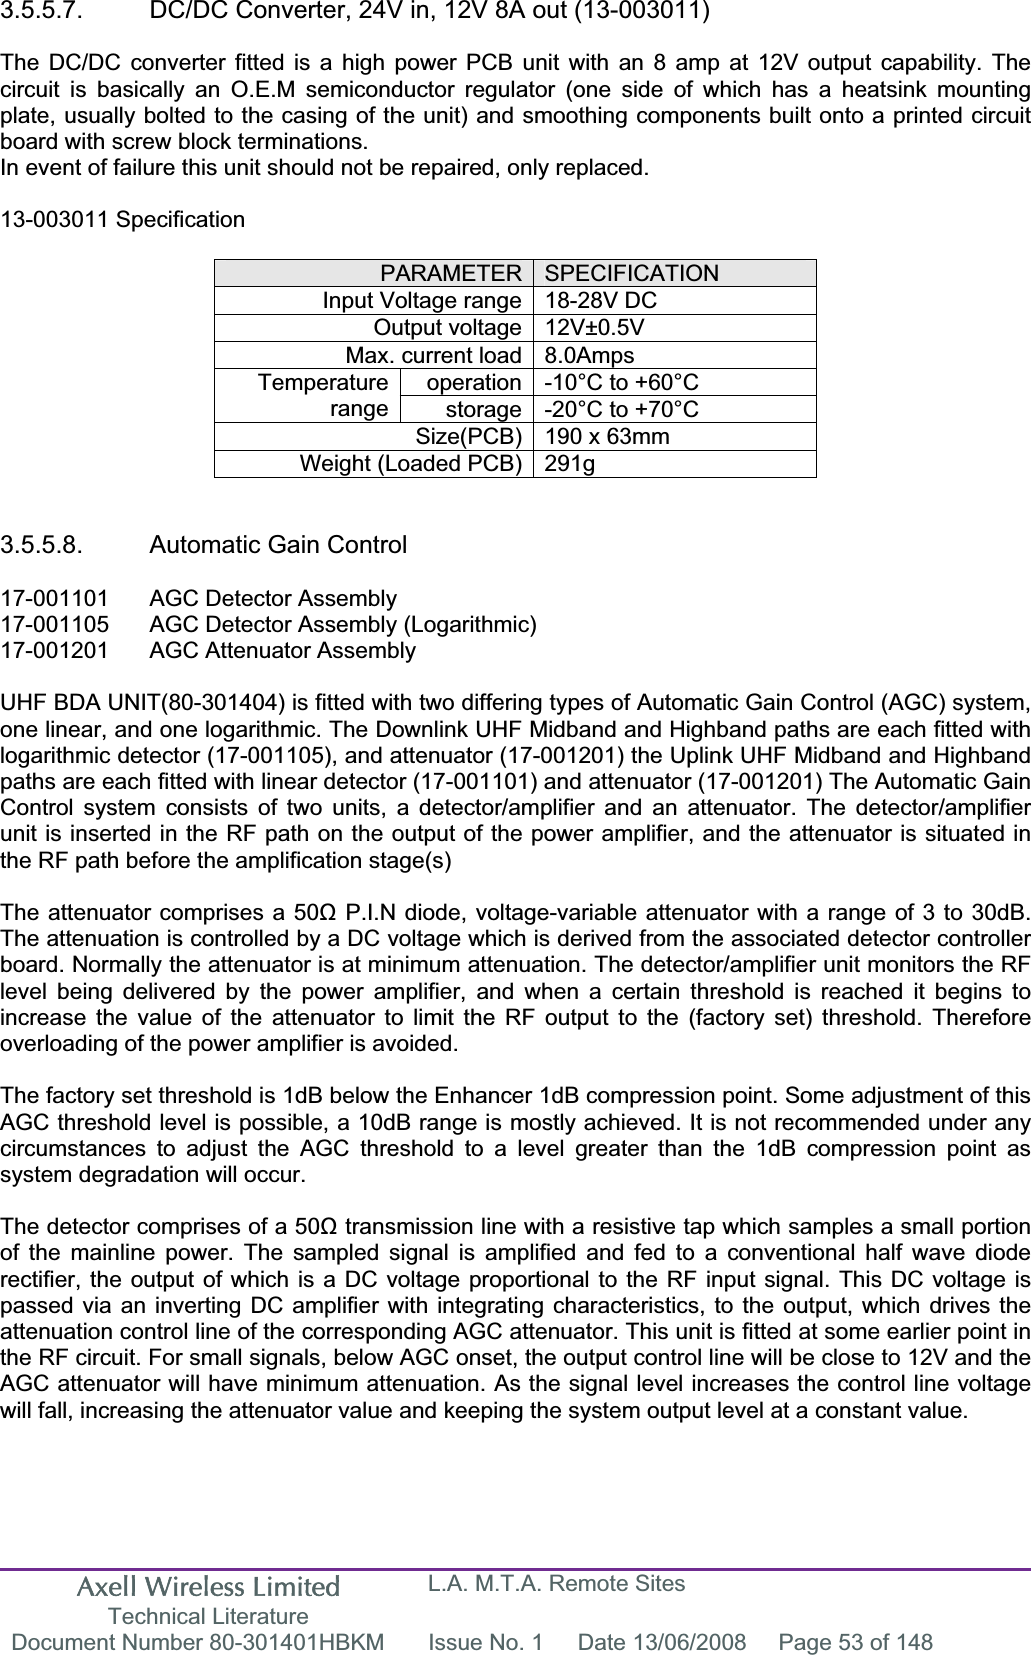 Axell Wireless Limited Technical Literature L.A. M.T.A. Remote Sites Document Number 80-301401HBKM  Issue No. 1  Date 13/06/2008  Page 53 of 148 3.5.5.7.  DC/DC Converter, 24V in, 12V 8A out (13-003011) The DC/DC converter fitted is a high power PCB unit with an 8 amp at 12V output capability. The circuit is basically an O.E.M semiconductor regulator (one side of which has a heatsink mounting plate, usually bolted to the casing of the unit) and smoothing components built onto a printed circuit board with screw block terminations. In event of failure this unit should not be repaired, only replaced. 13-003011 Specification PARAMETER SPECIFICATIONInput Voltage range 18-28V DC Output voltage 12V±0.5V Max. current load 8.0Amps operation -10°C to +60°C Temperaturerange storage -20°C to +70°C Size(PCB) 190 x 63mm Weight (Loaded PCB) 291g 3.5.5.8.  Automatic Gain Control 17-001101  AGC Detector Assembly 17-001105  AGC Detector Assembly (Logarithmic) 17-001201  AGC Attenuator Assembly  UHF BDA UNIT(80-301404) is fitted with two differing types of Automatic Gain Control (AGC) system, one linear, and one logarithmic. The Downlink UHF Midband and Highband paths are each fitted with logarithmic detector (17-001105), and attenuator (17-001201) the Uplink UHF Midband and Highband paths are each fitted with linear detector (17-001101) and attenuator (17-001201) The Automatic Gain Control system consists of two units, a detector/amplifier and an attenuator. The detector/amplifier unit is inserted in the RF path on the output of the power amplifier, and the attenuator is situated in the RF path before the amplification stage(s)The attenuator comprises a 50ȍ P.I.N diode, voltage-variable attenuator with a range of 3 to 30dB. The attenuation is controlled by a DC voltage which is derived from the associated detector controller board. Normally the attenuator is at minimum attenuation. The detector/amplifier unit monitors the RF level being delivered by the power amplifier, and when a certain threshold is reached it begins to increase the value of the attenuator to limit the RF output to the (factory set) threshold. Therefore overloading of the power amplifier is avoided. The factory set threshold is 1dB below the Enhancer 1dB compression point. Some adjustment of this AGC threshold level is possible, a 10dB range is mostly achieved. It is not recommended under any circumstances to adjust the AGC threshold to a level greater than the 1dB compression point as system degradation will occur. The detector comprises of a 50ȍ transmission line with a resistive tap which samples a small portion of the mainline power. The sampled signal is amplified and fed to a conventional half wave diode rectifier, the output of which is a DC voltage proportional to the RF input signal. This DC voltage is passed via an inverting DC amplifier with integrating characteristics, to the output, which drives the attenuation control line of the corresponding AGC attenuator. This unit is fitted at some earlier point in the RF circuit. For small signals, below AGC onset, the output control line will be close to 12V and the AGC attenuator will have minimum attenuation. As the signal level increases the control line voltage will fall, increasing the attenuator value and keeping the system output level at a constant value. 